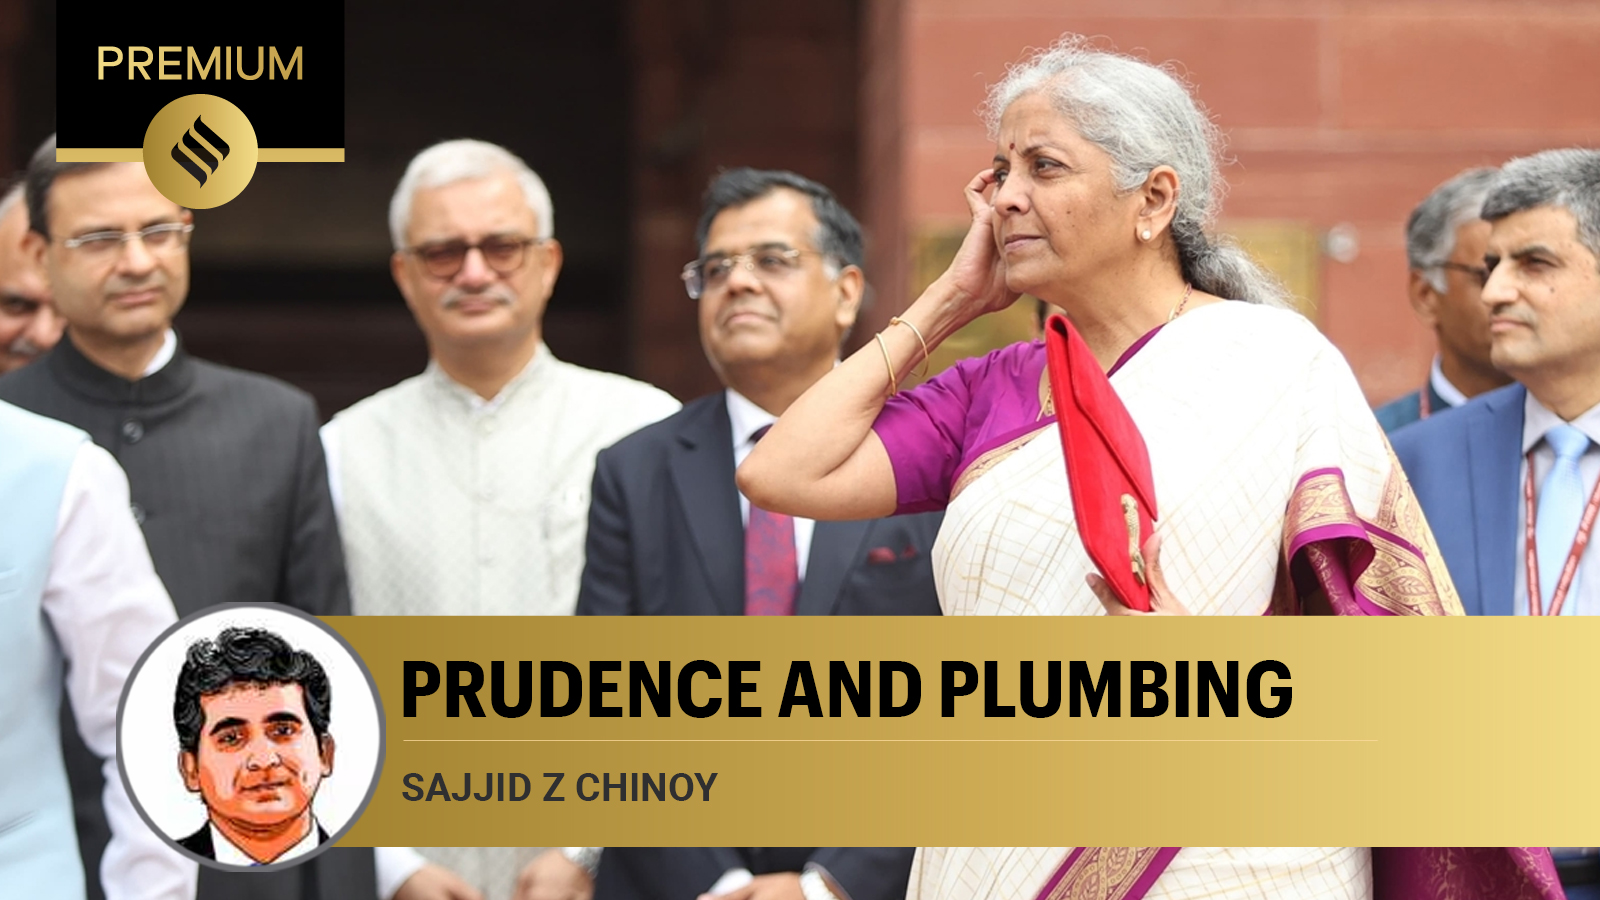 Sajjid Chinoy writes: Budget makes a beginning in fixing economy’s plumbing. Implementation is key